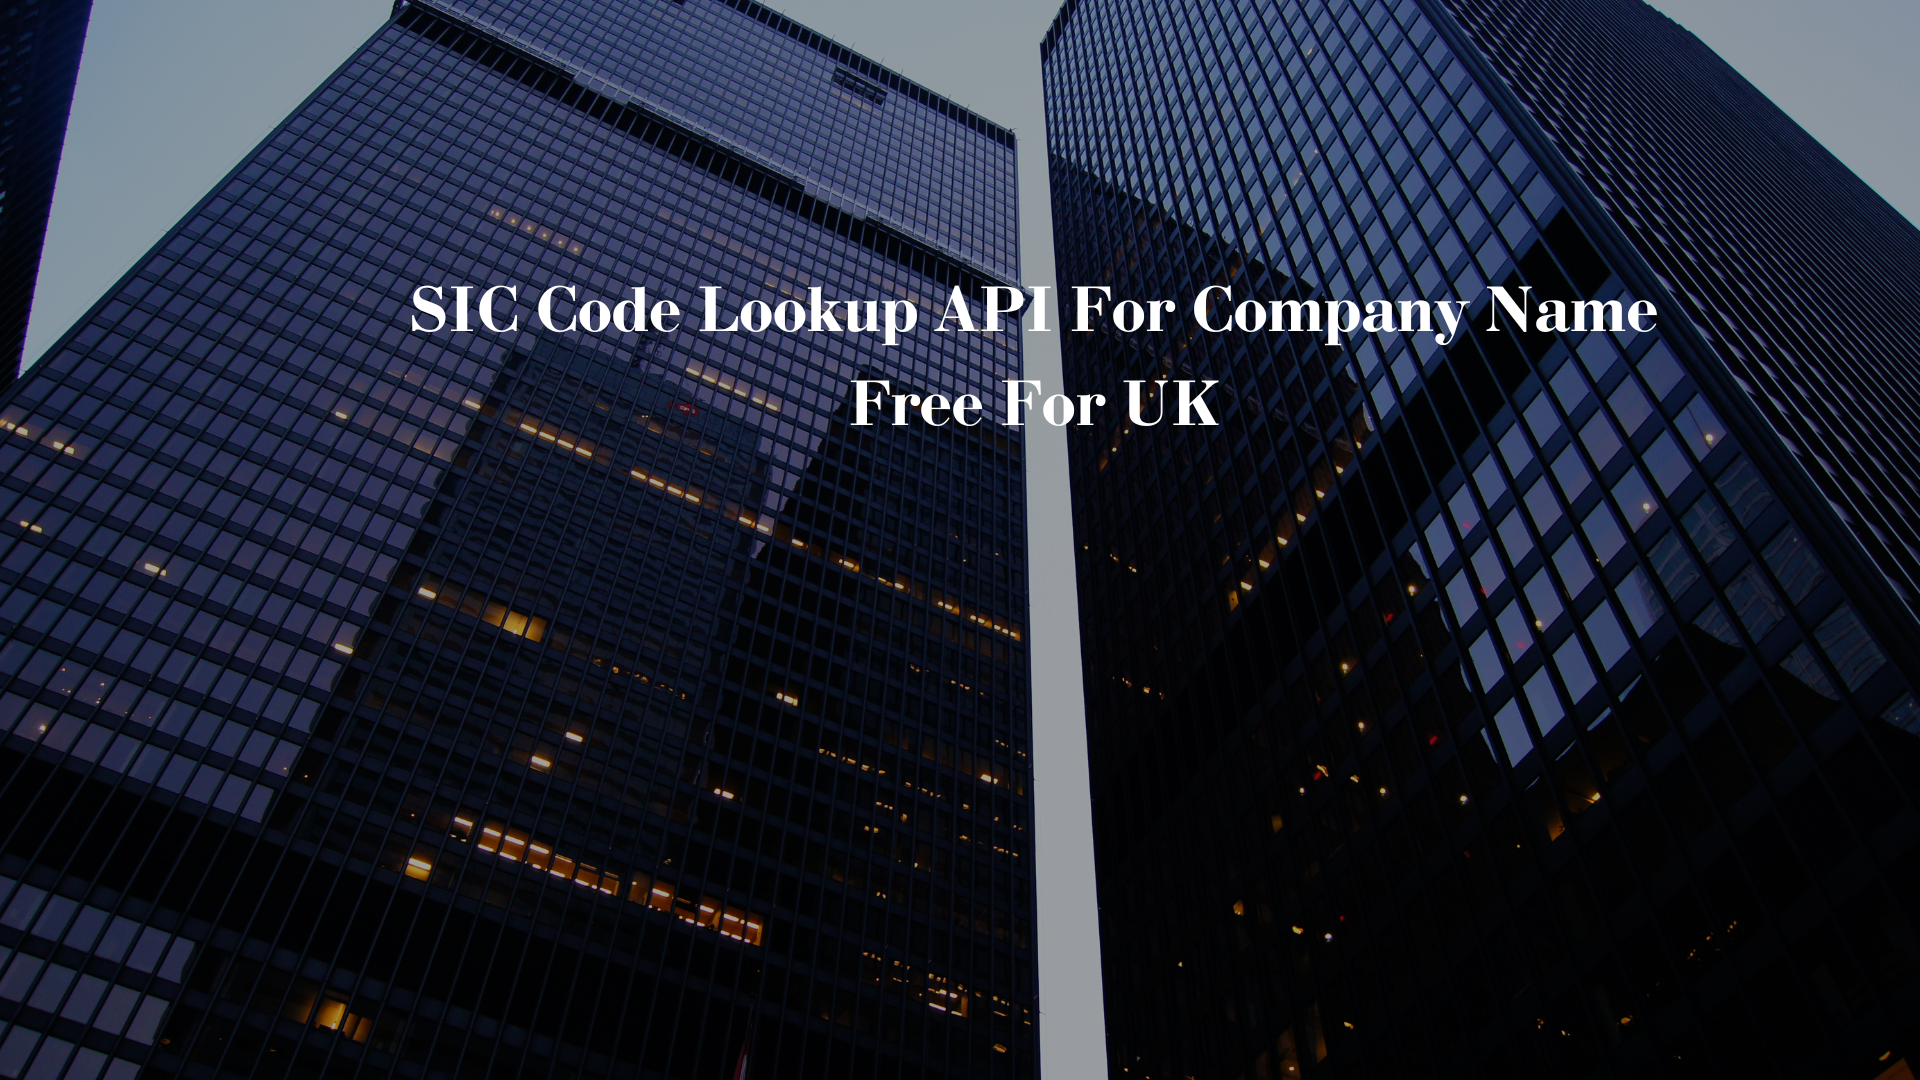 SIC Code Lookup API For Company Name Free For UK